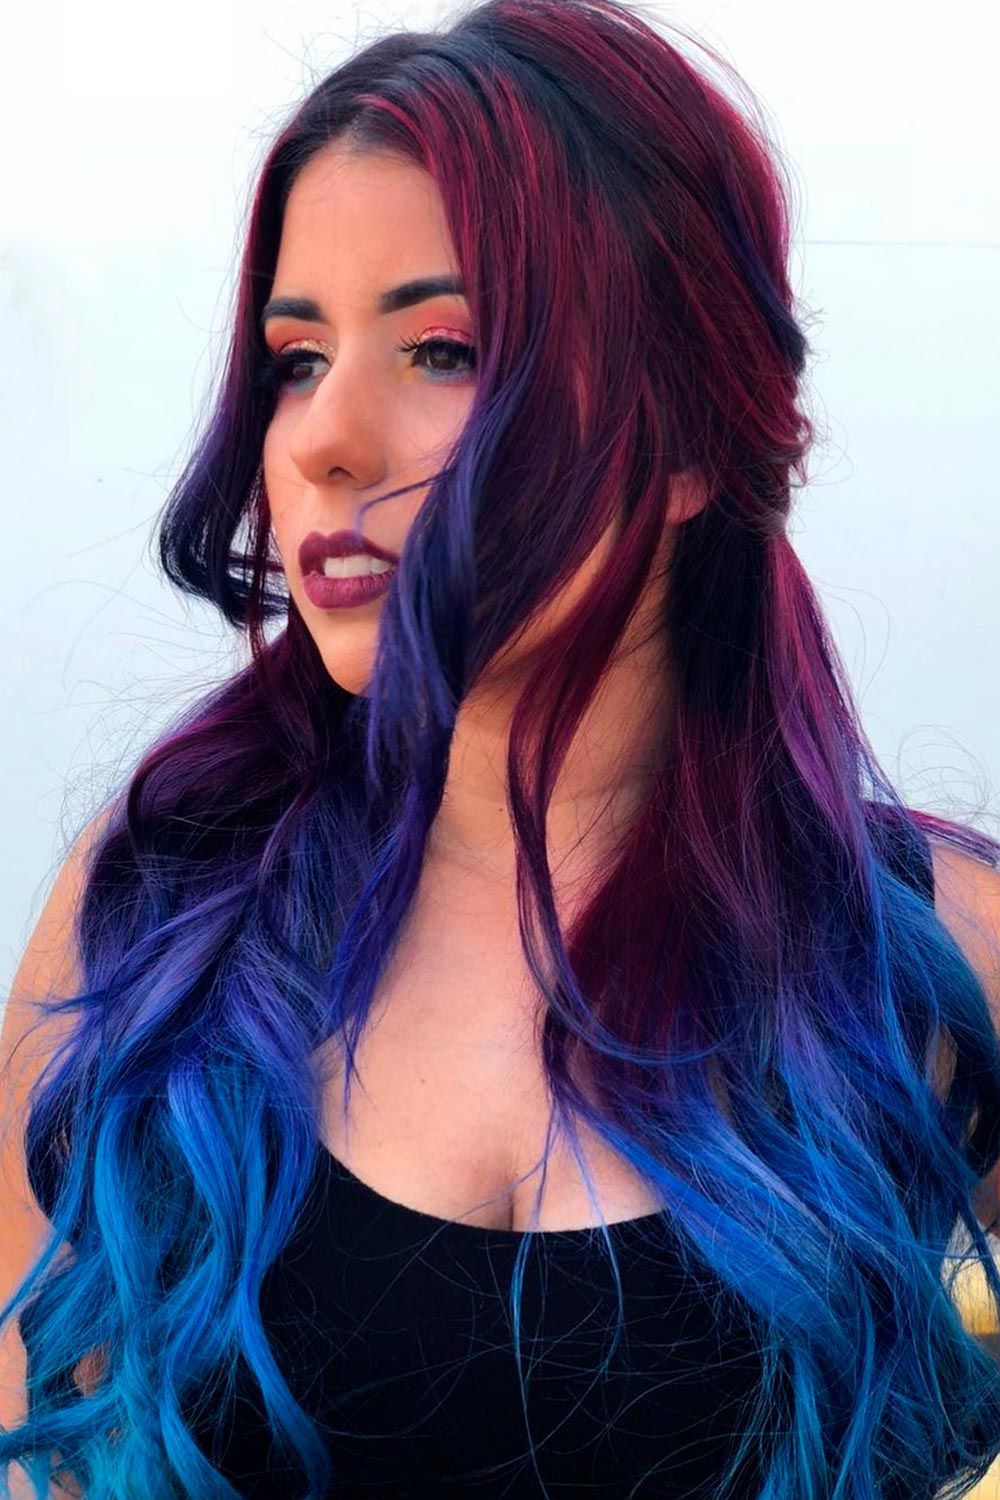 Fabulous Purple And Blue Hair Styles | Lovehairstyles.Com